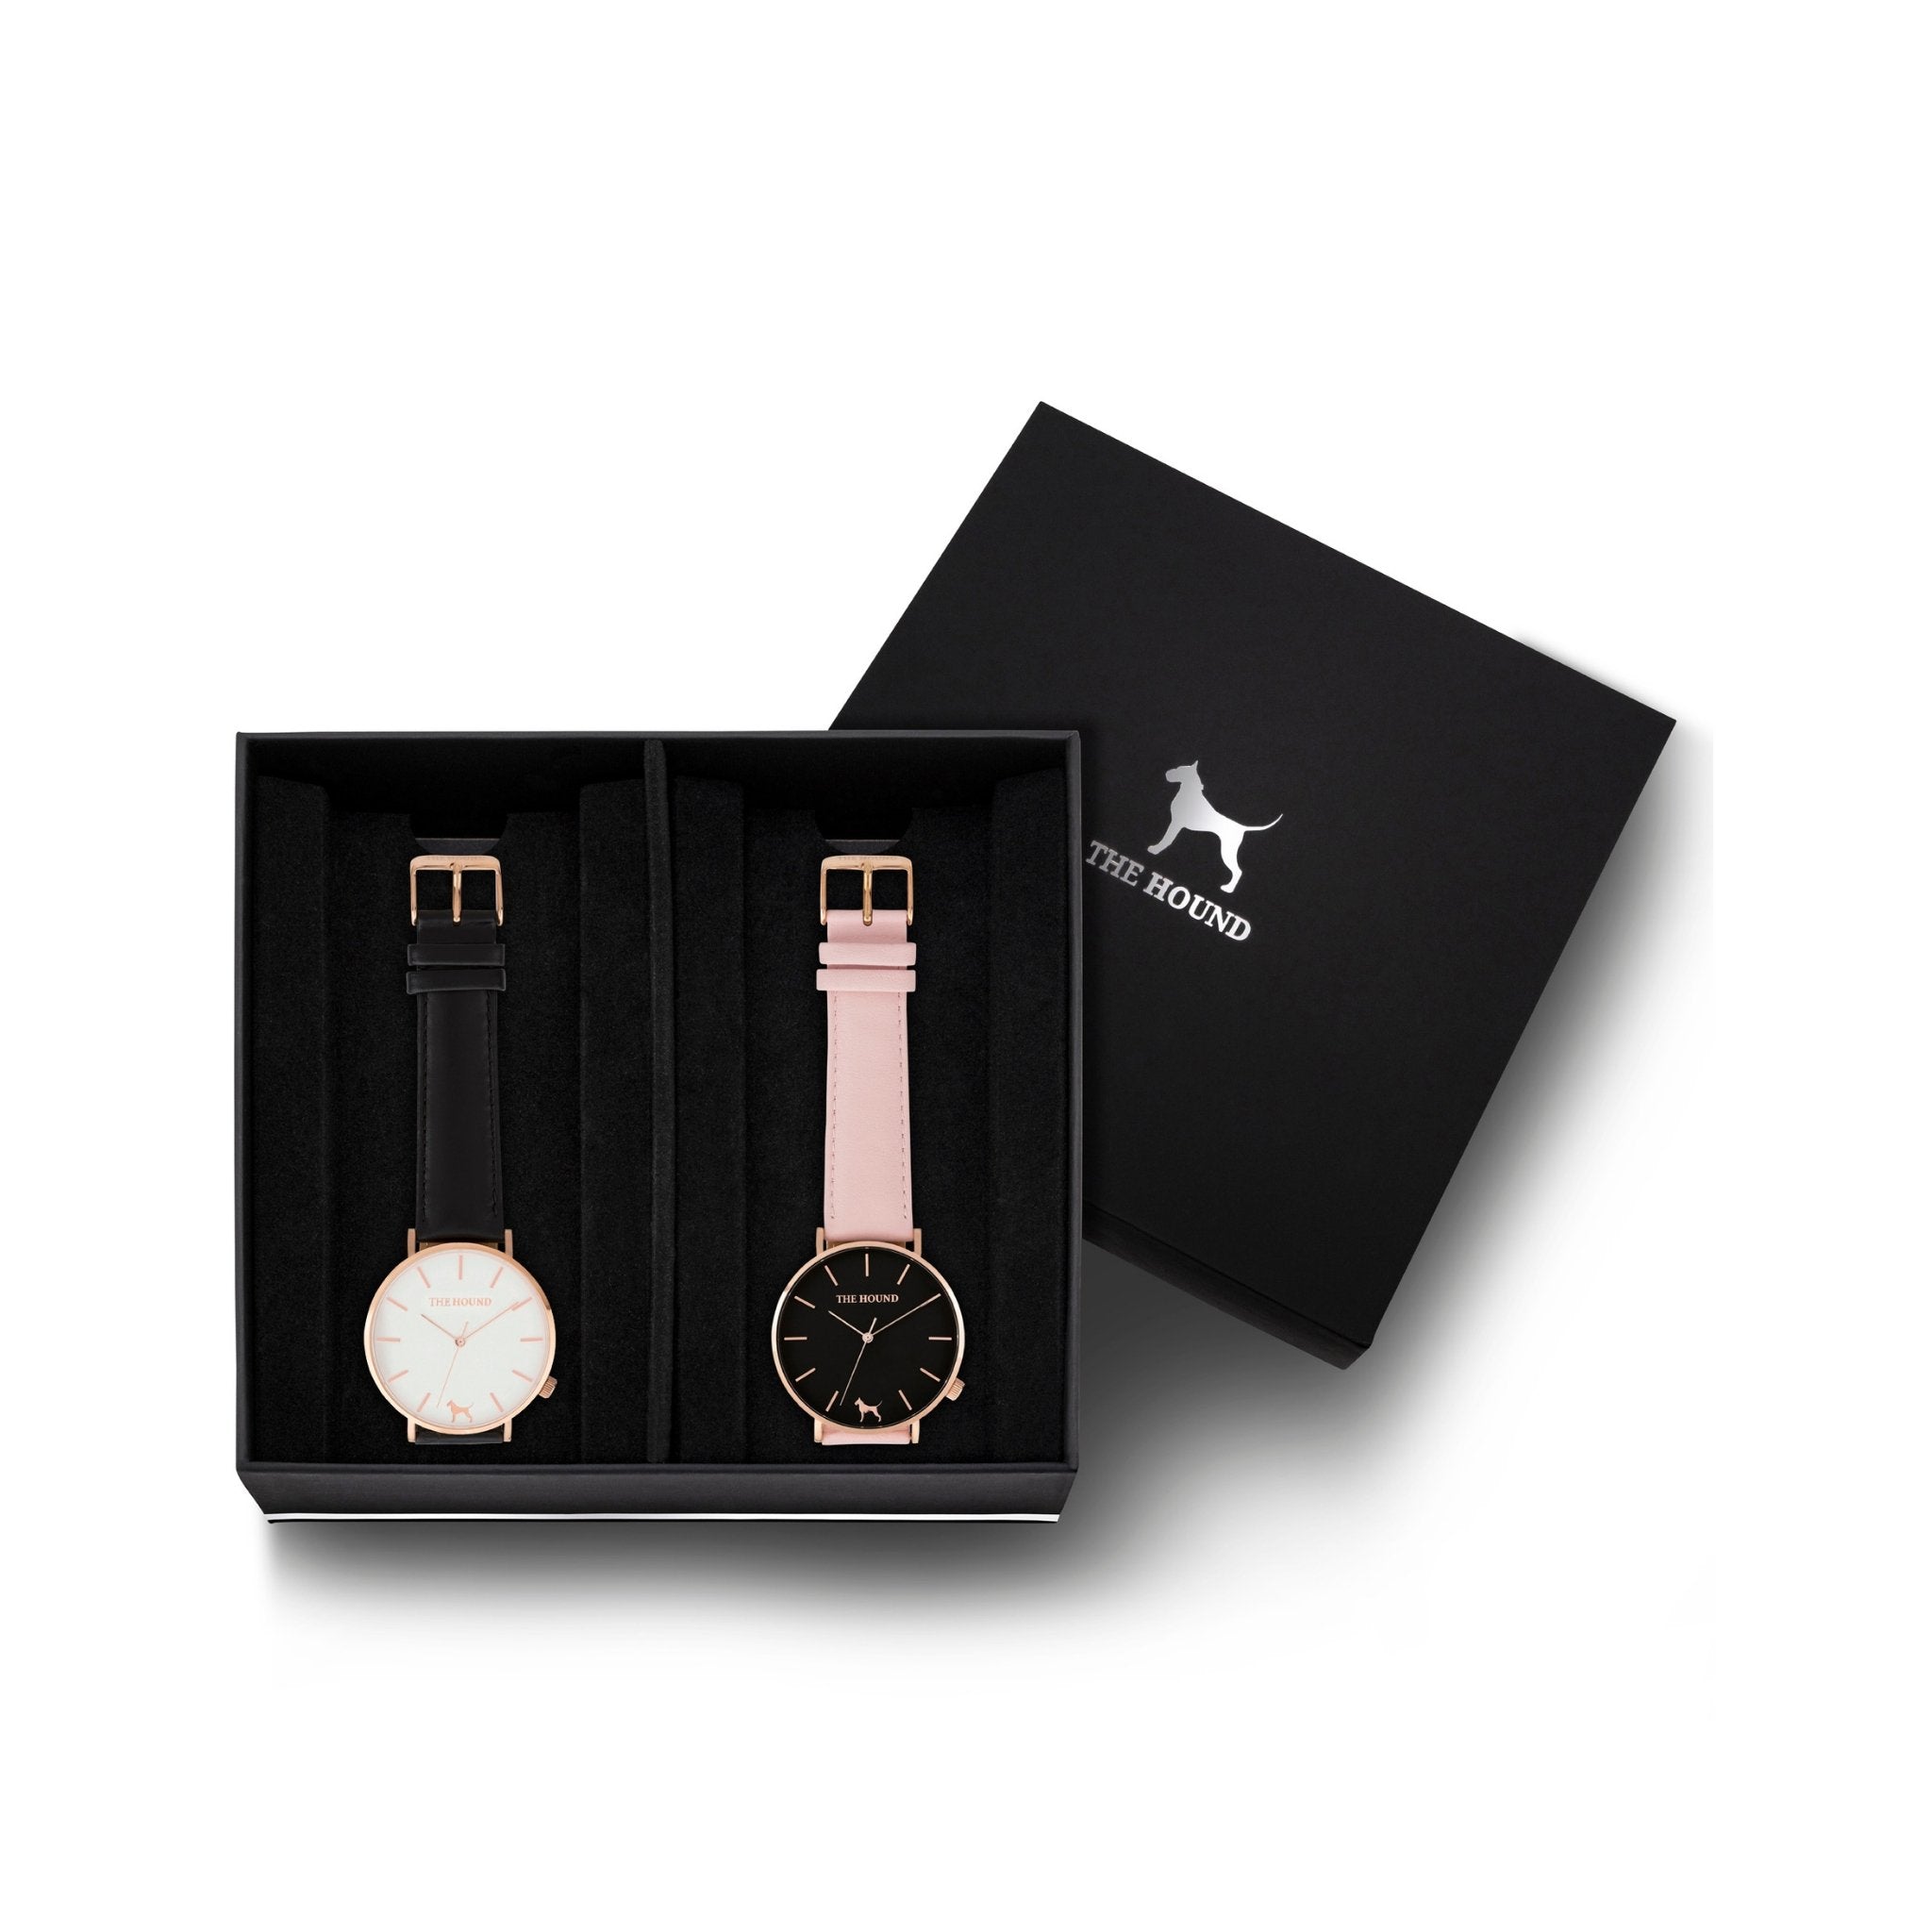 Custom gift set - Rose gold and white watch with stitched black genuine leather band and a rose gold and black watch with stitched blush pink genuine leather band